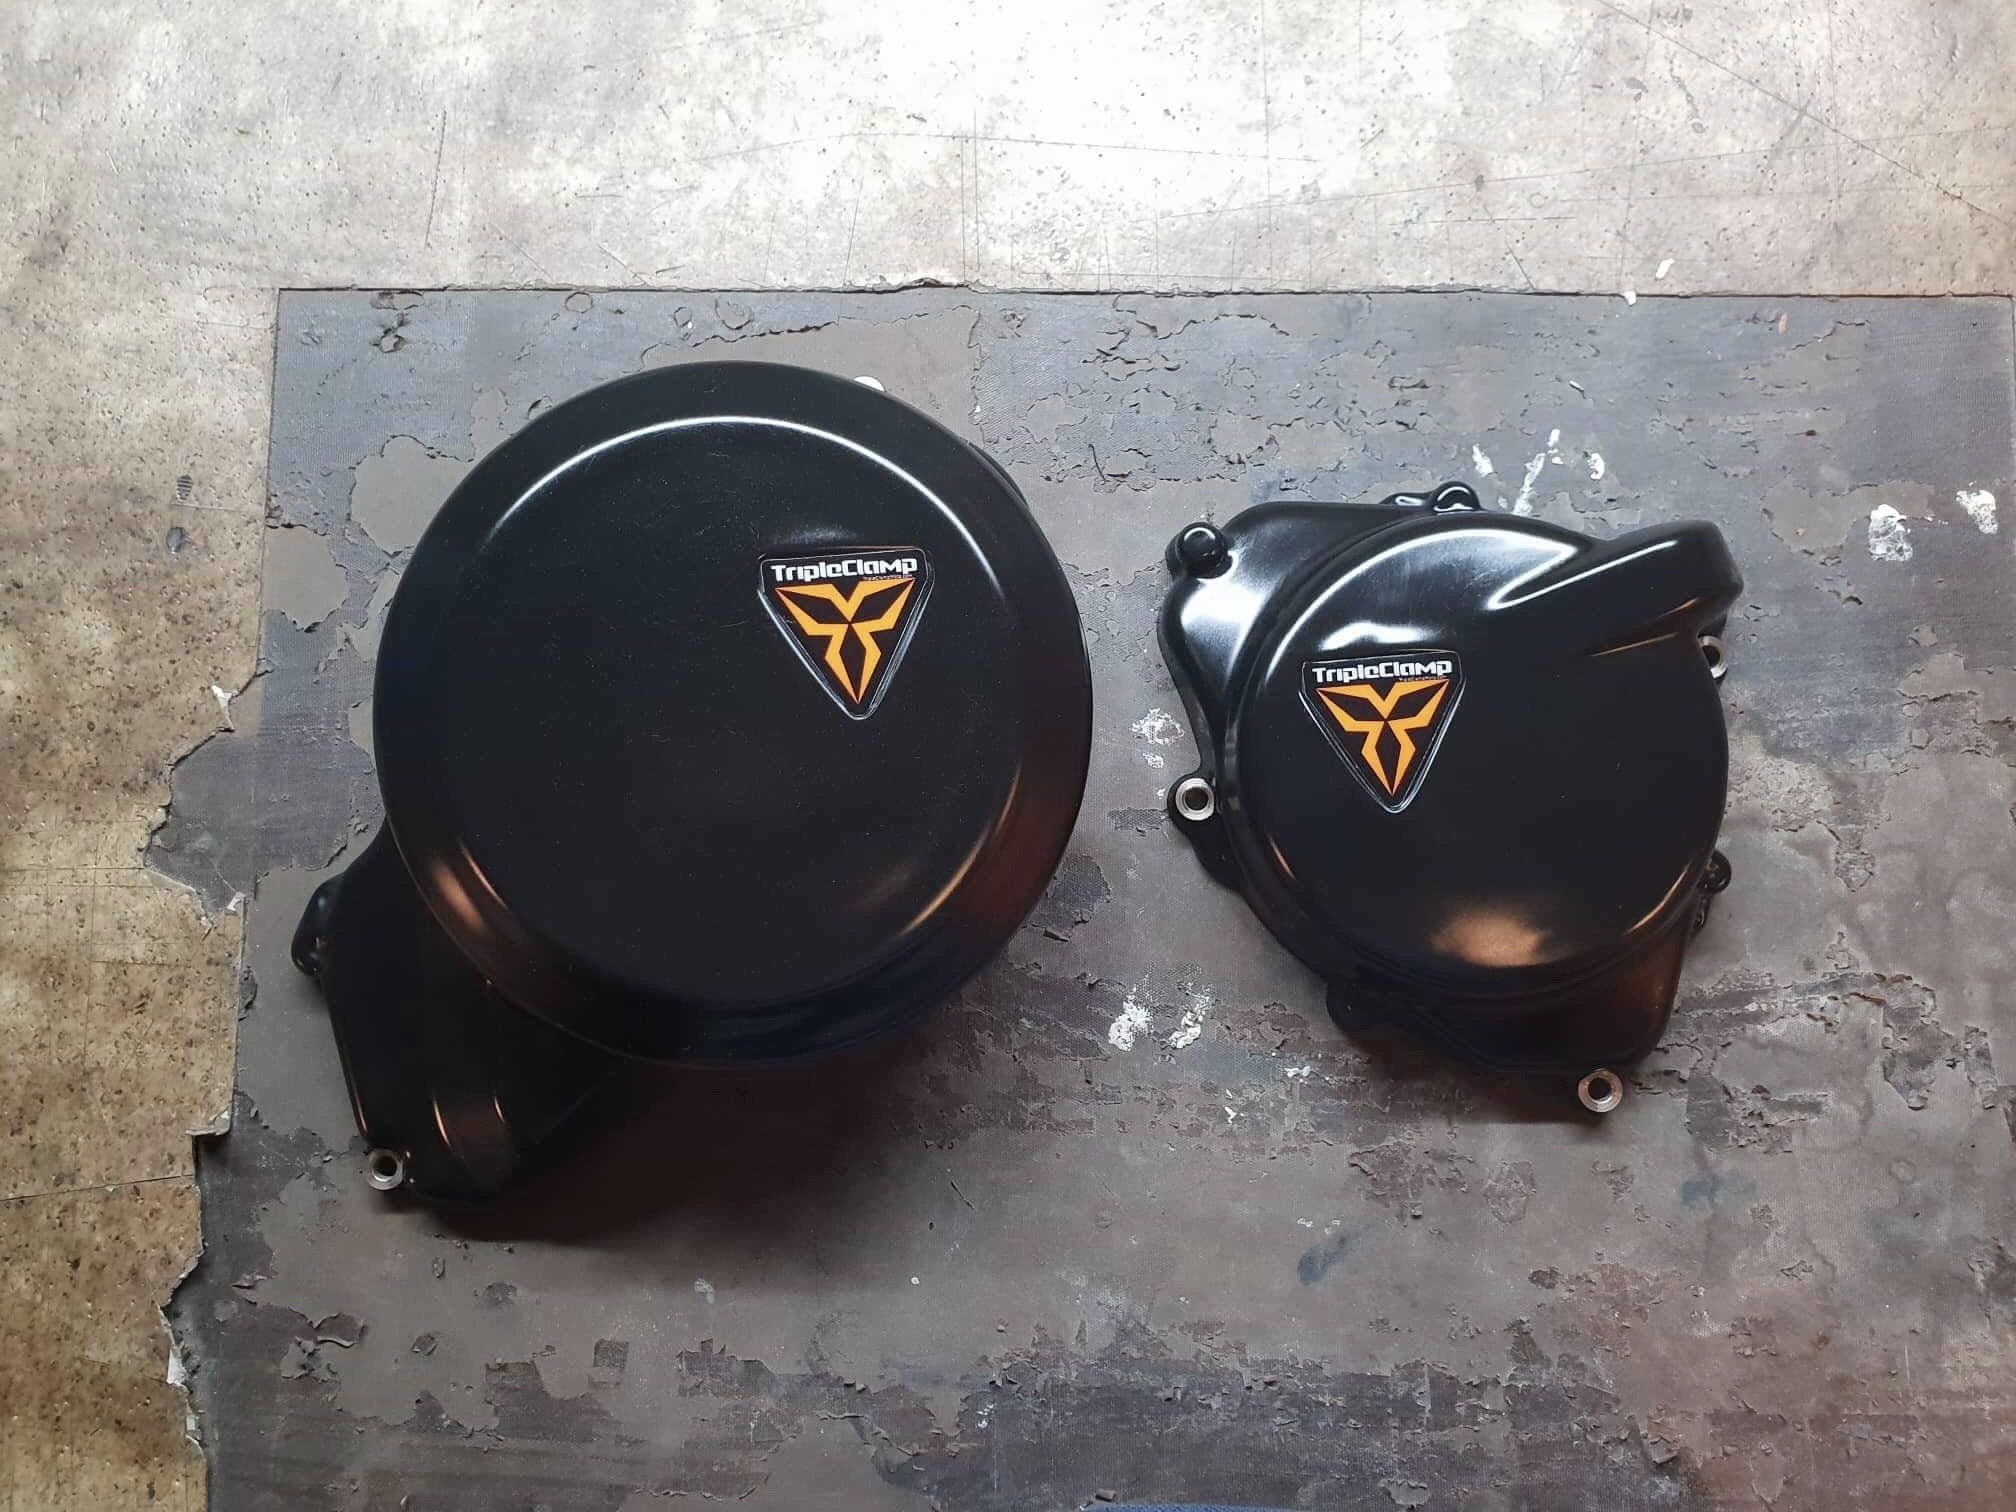 HDPE engine protection covers for KTM 690 and Husqvarna 701